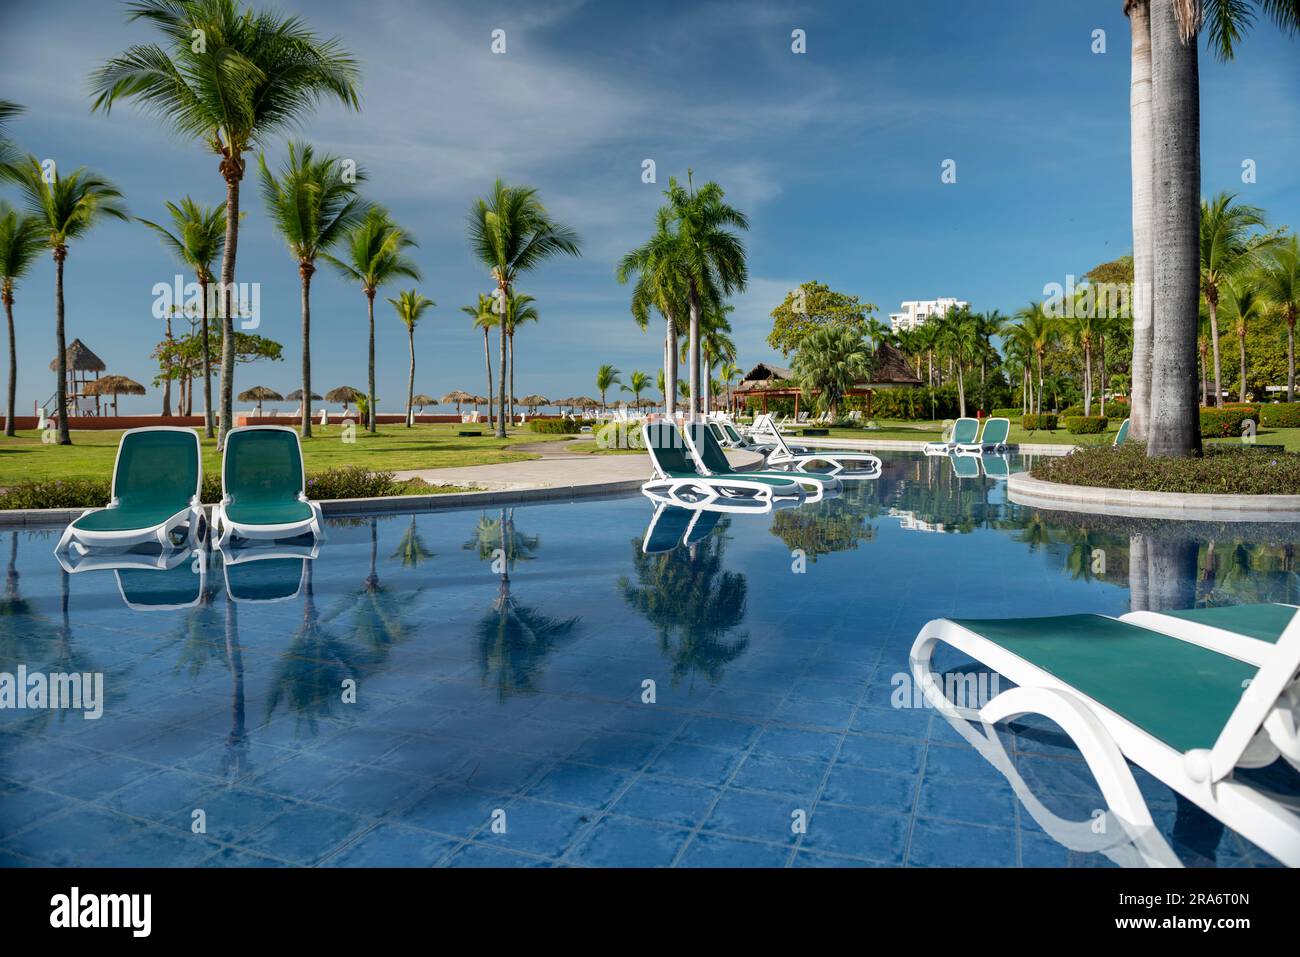 Tanning beds beside swimming pool in tropical resort, Pacific rivera, Panama, Central America - stock photo Stock Photo